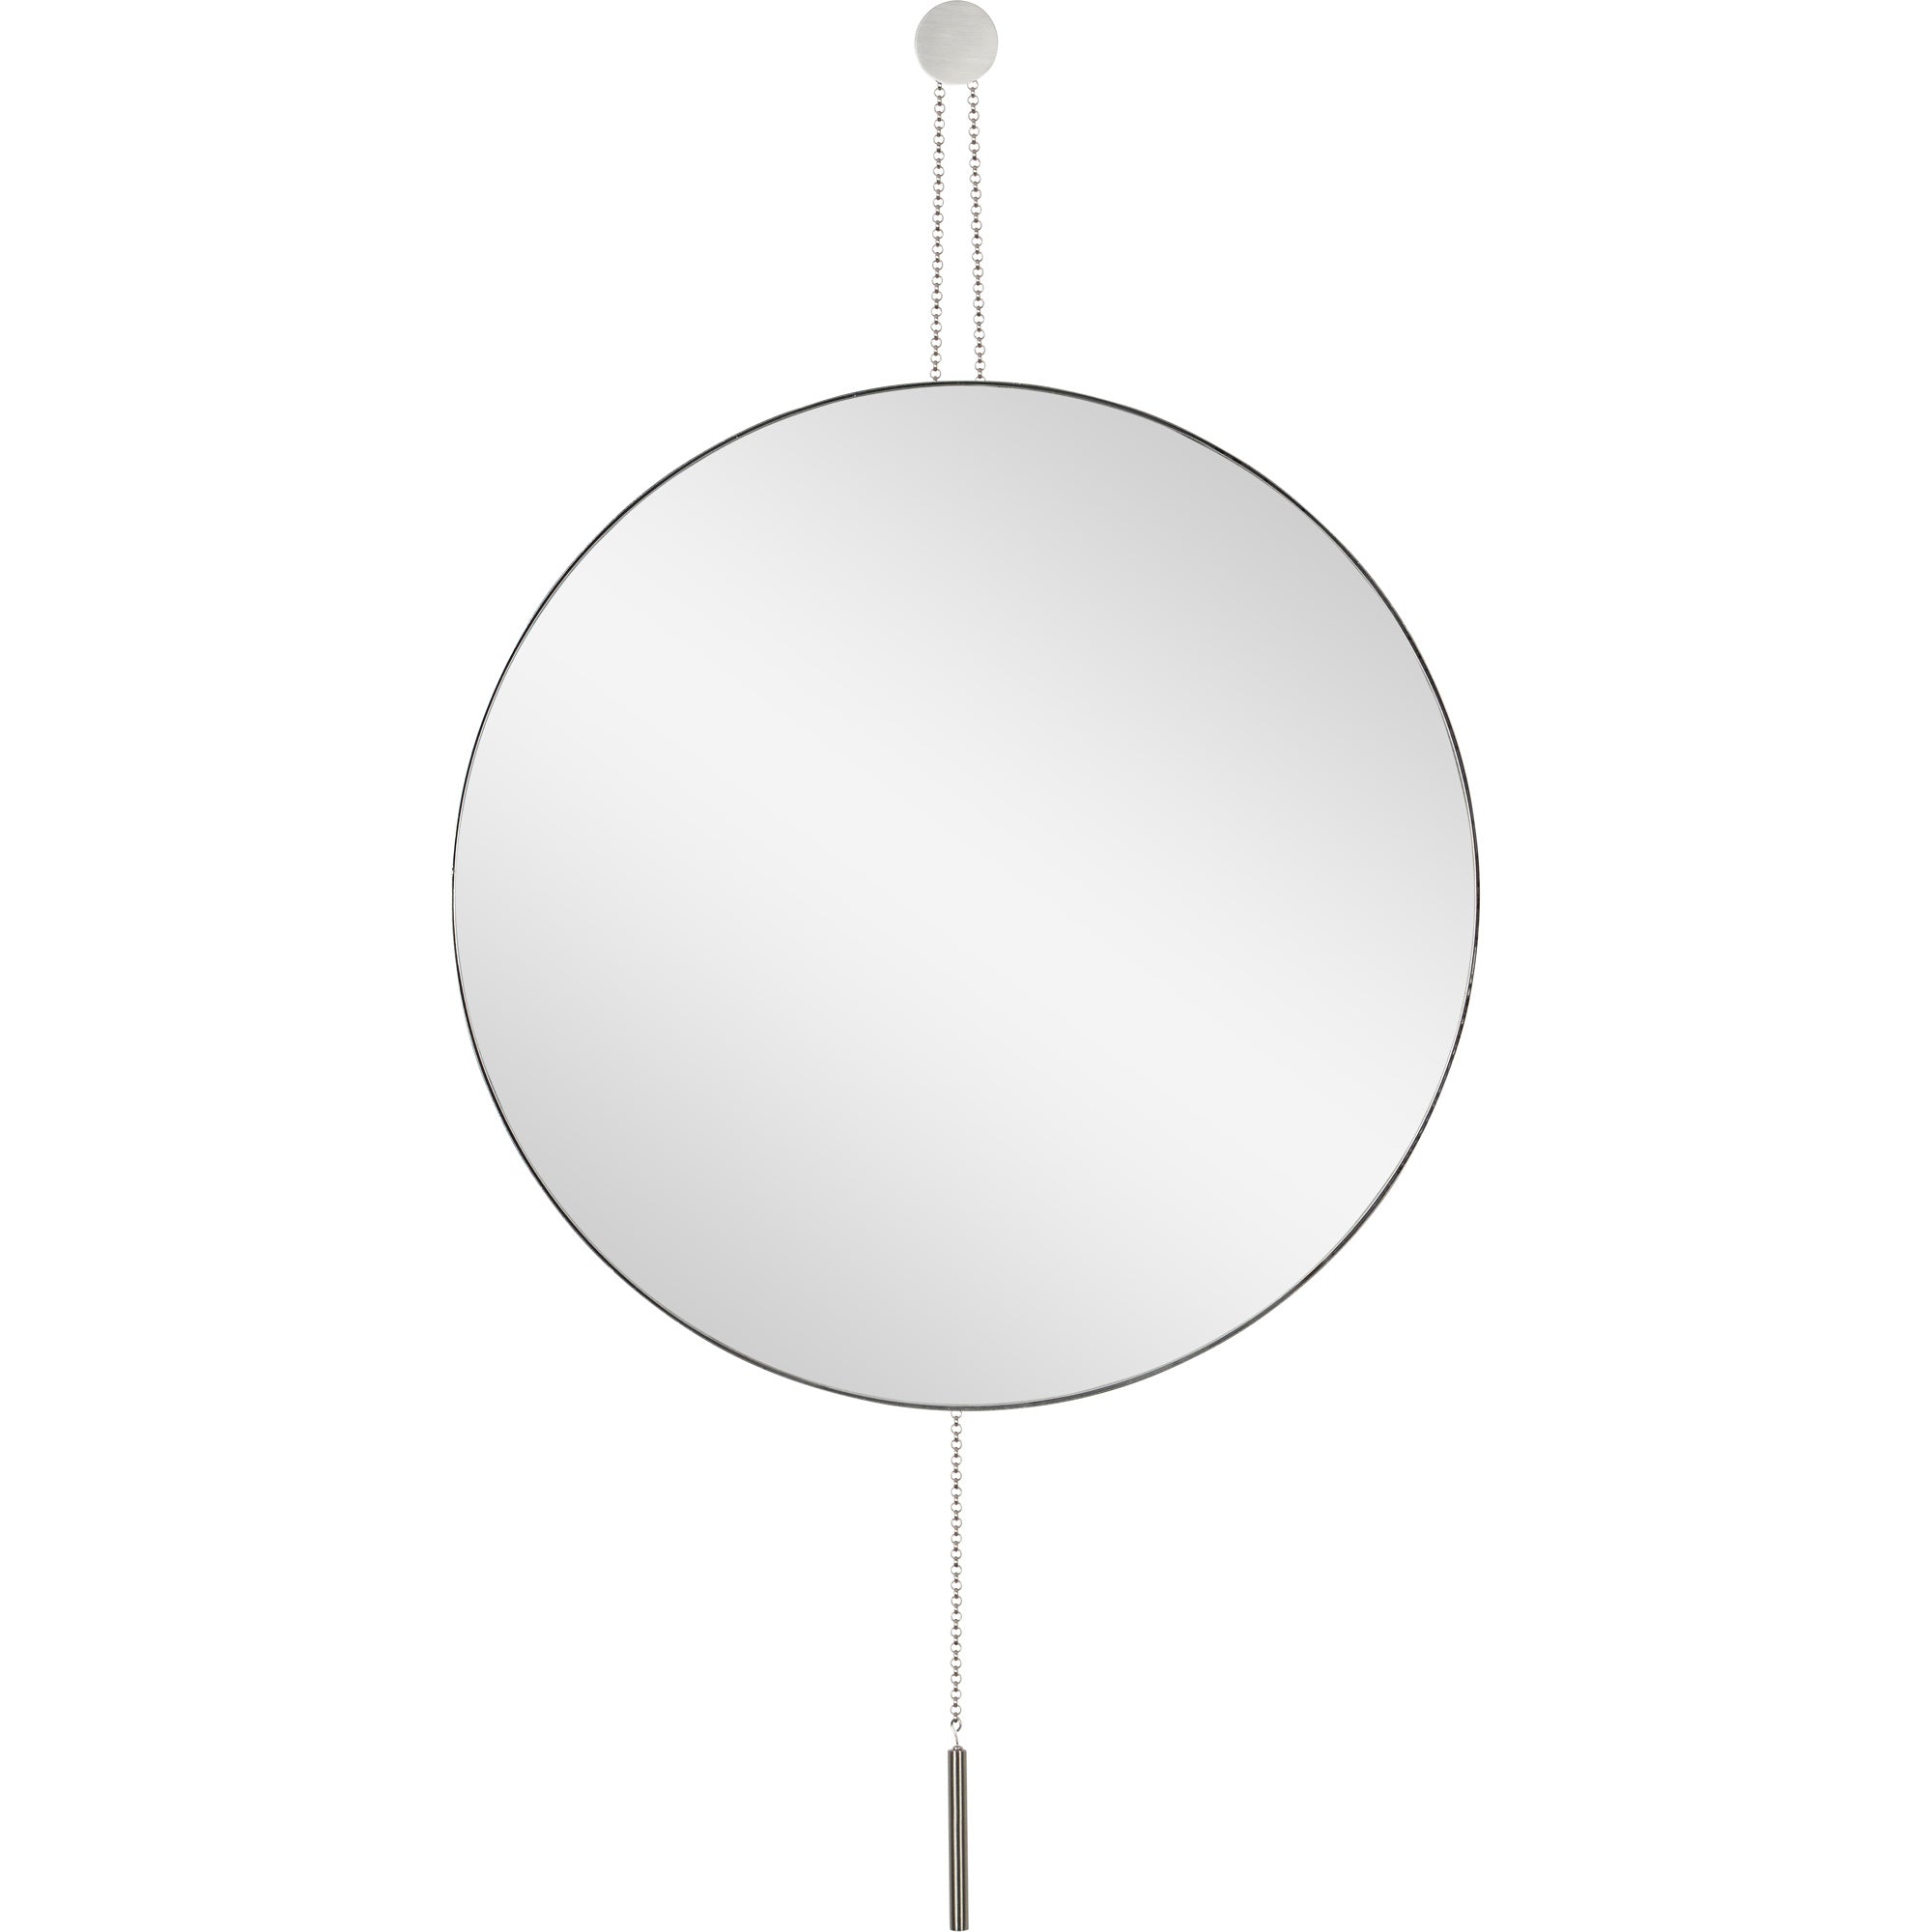 Coster 25" Iron - Nickel Plated Mirror